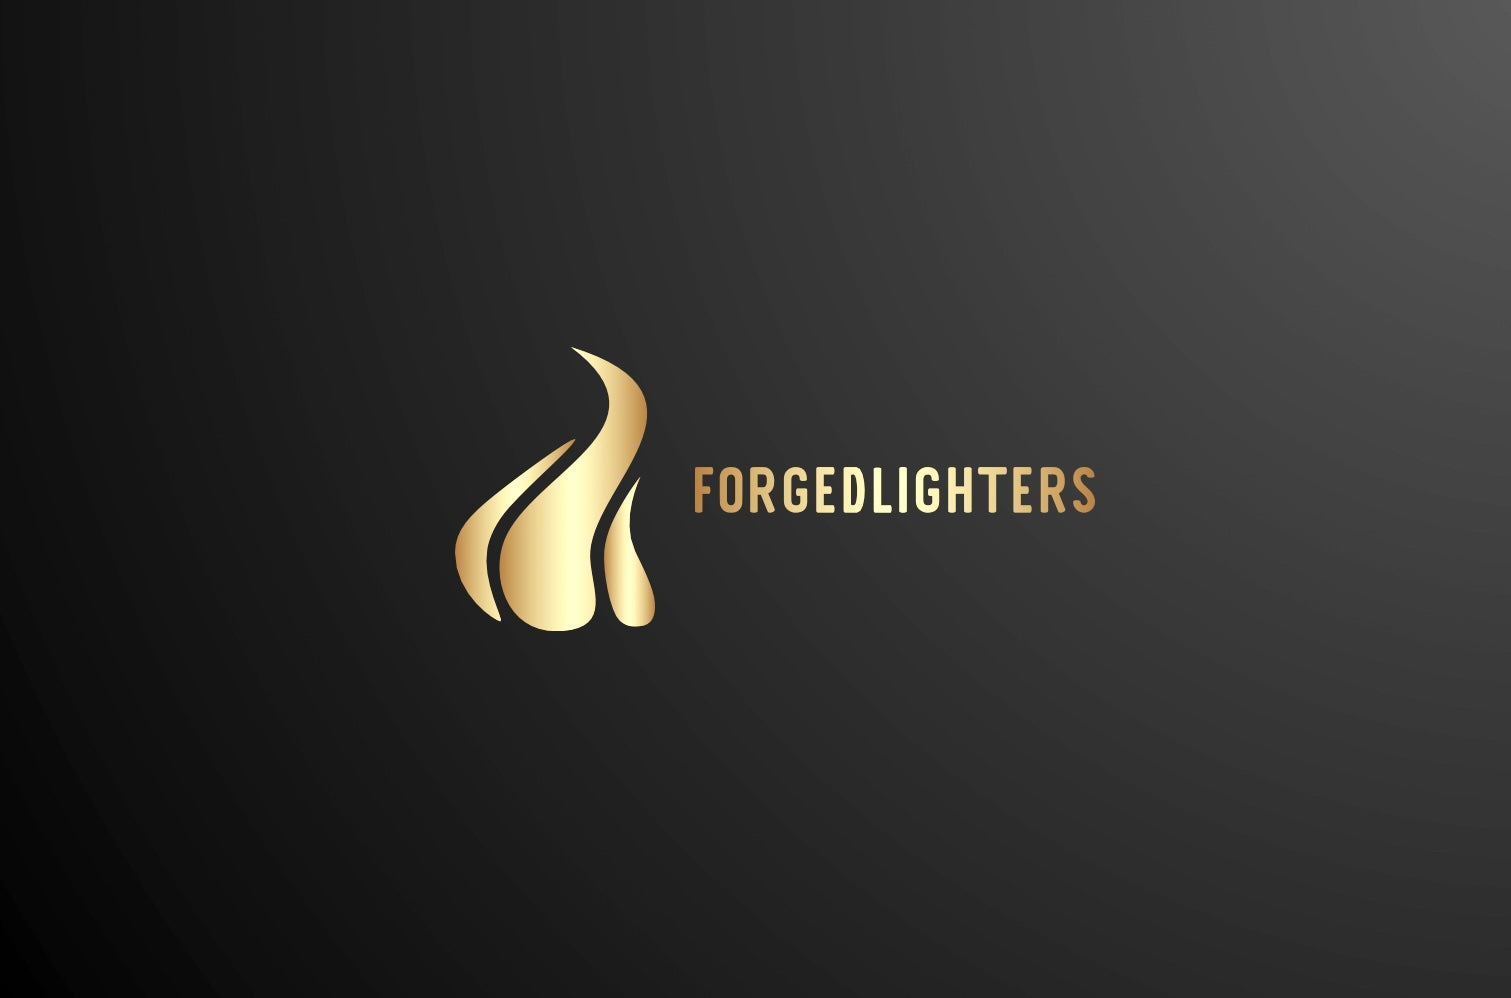 ForgedLighters